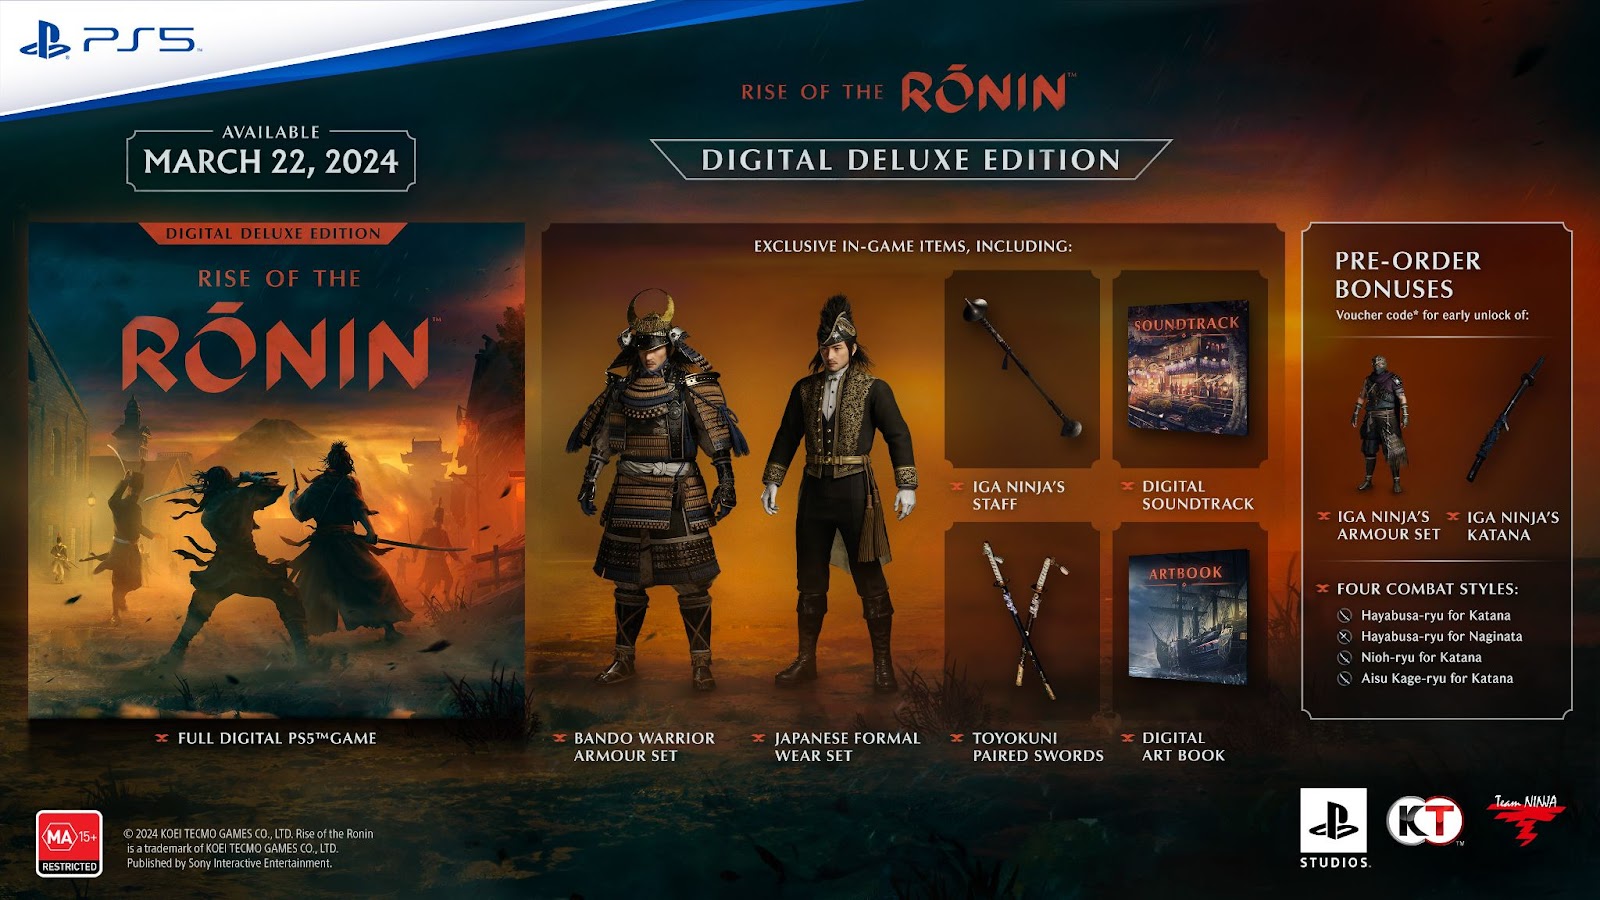 Rise of the Ronin arrives only on PS5 March 22 - Impulse Gamer